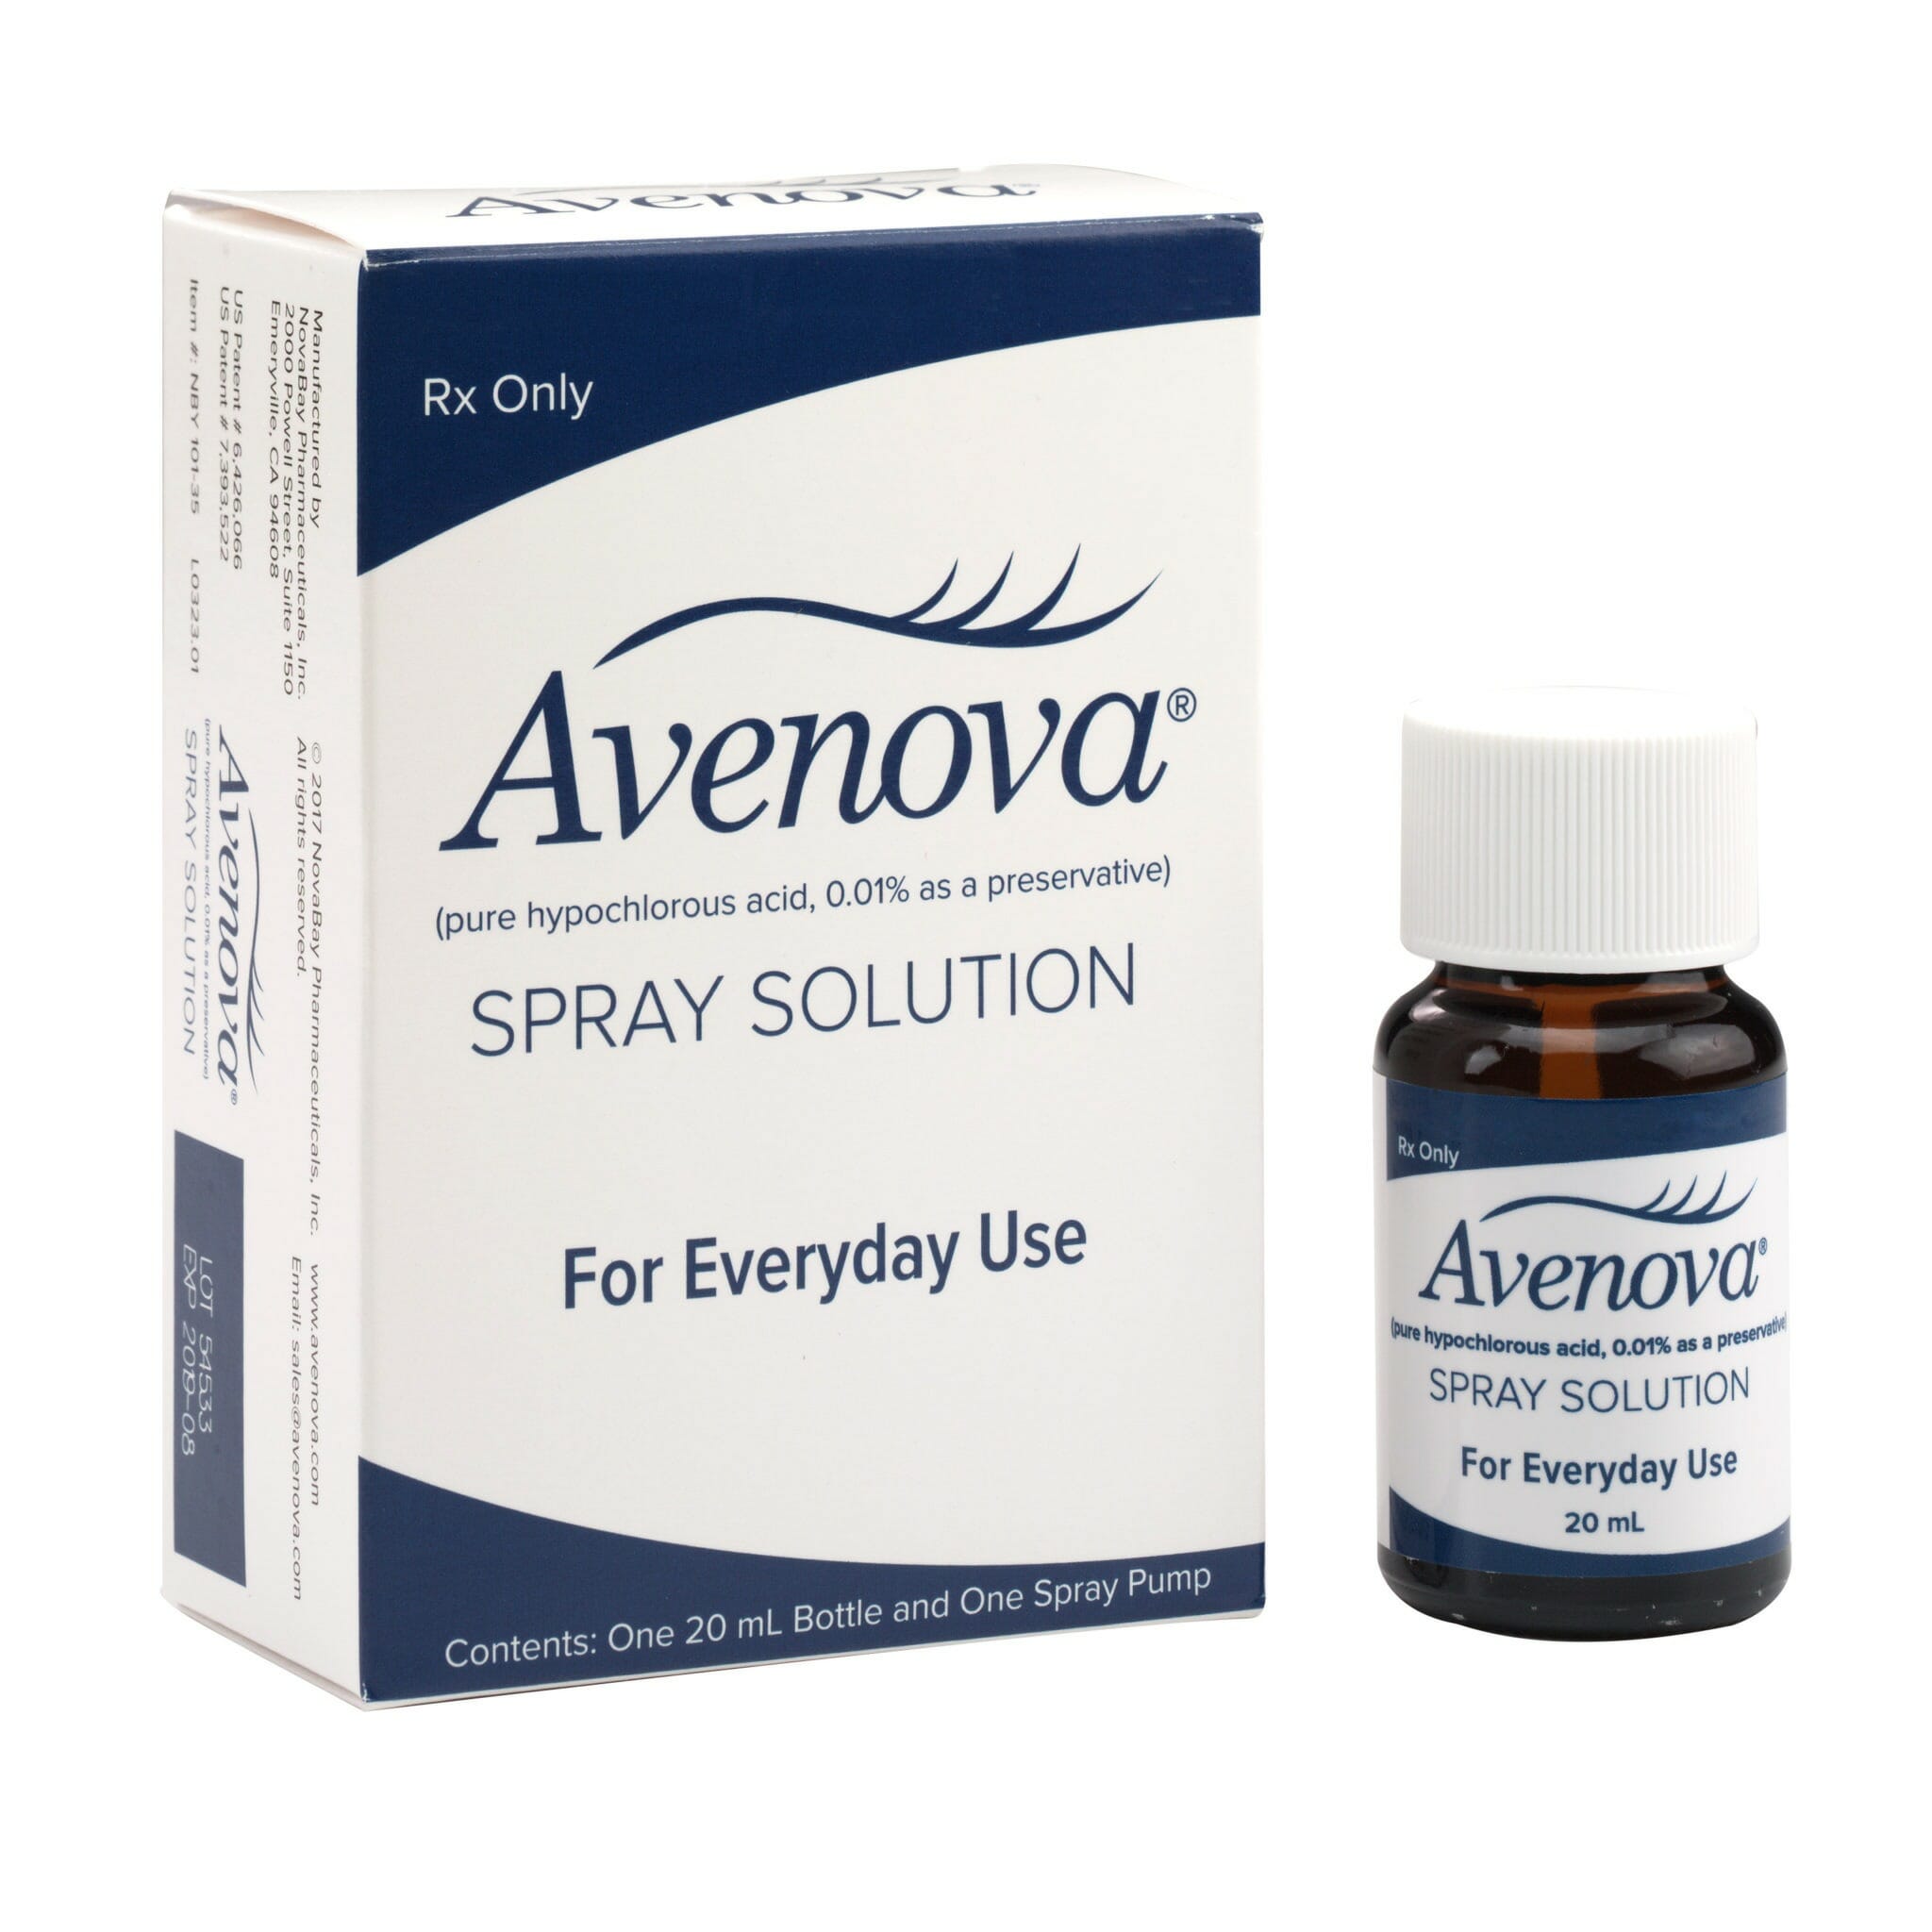 What's the price of Avenova lid wipes for eye cleansing?